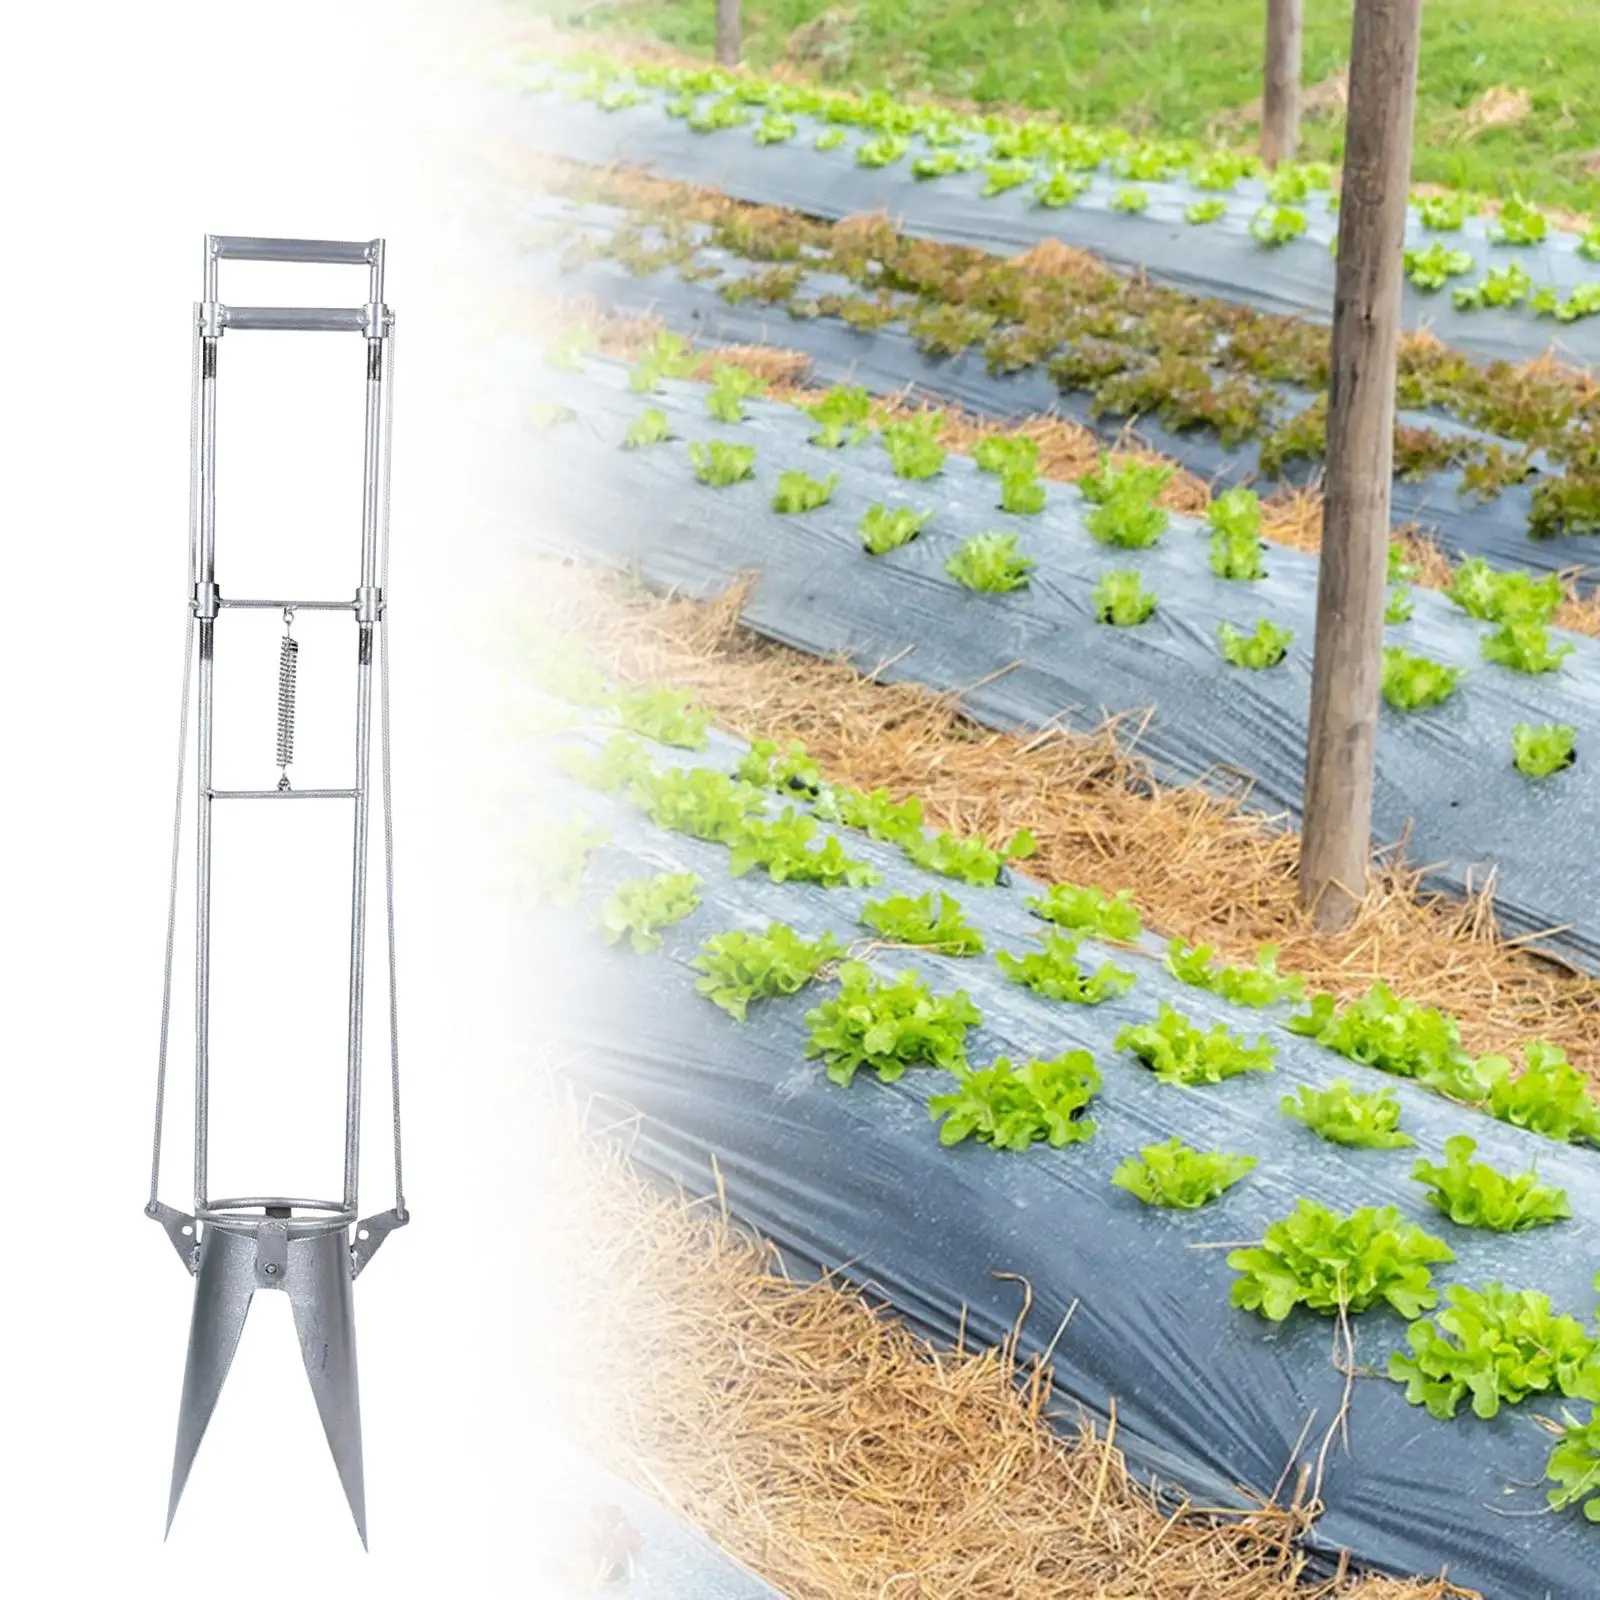 Semi Automatic Planter Gardening Sower Seedling Spreader for Greenhouse